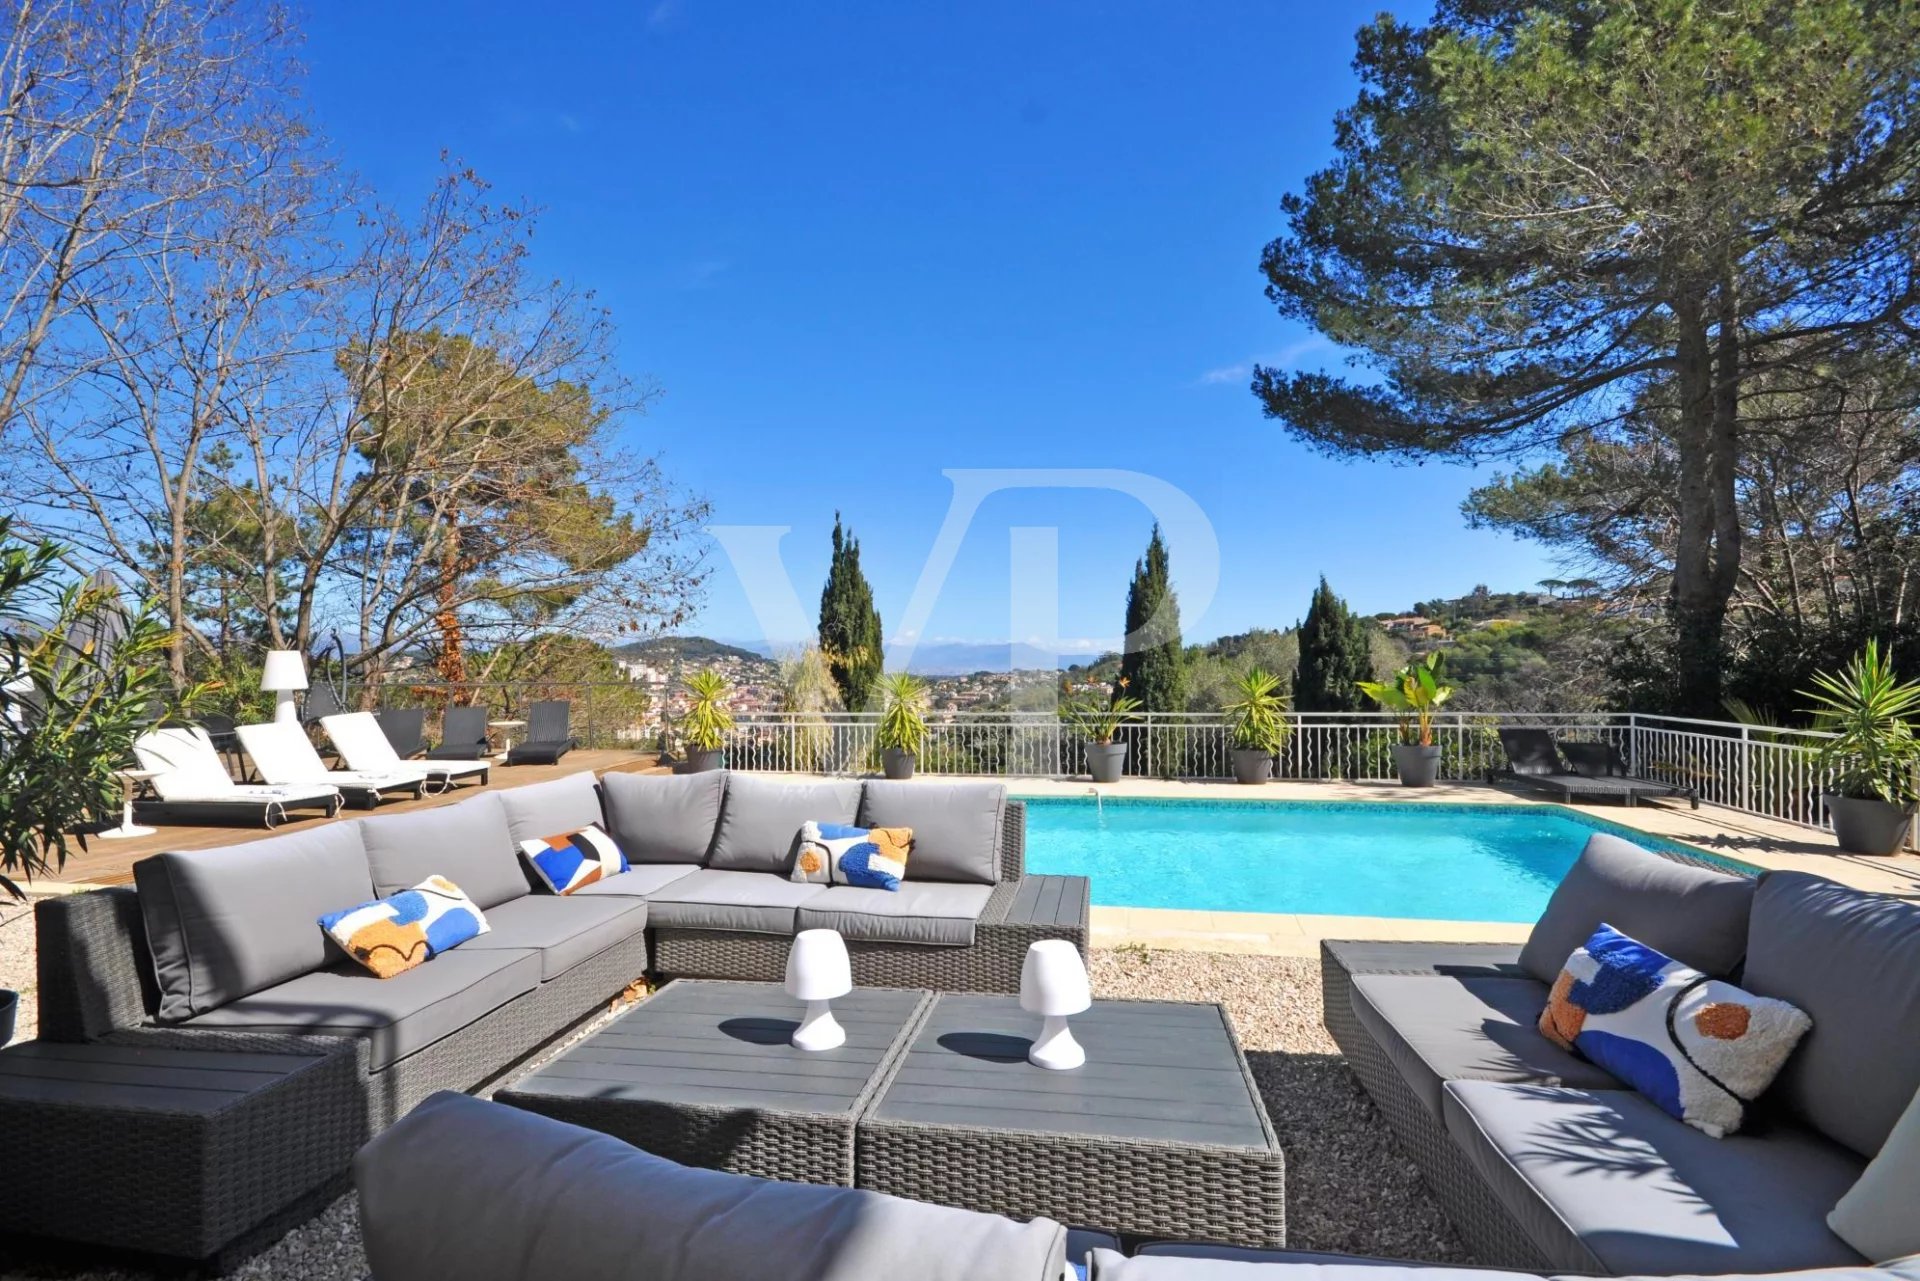 Super Cannes - villa with pool